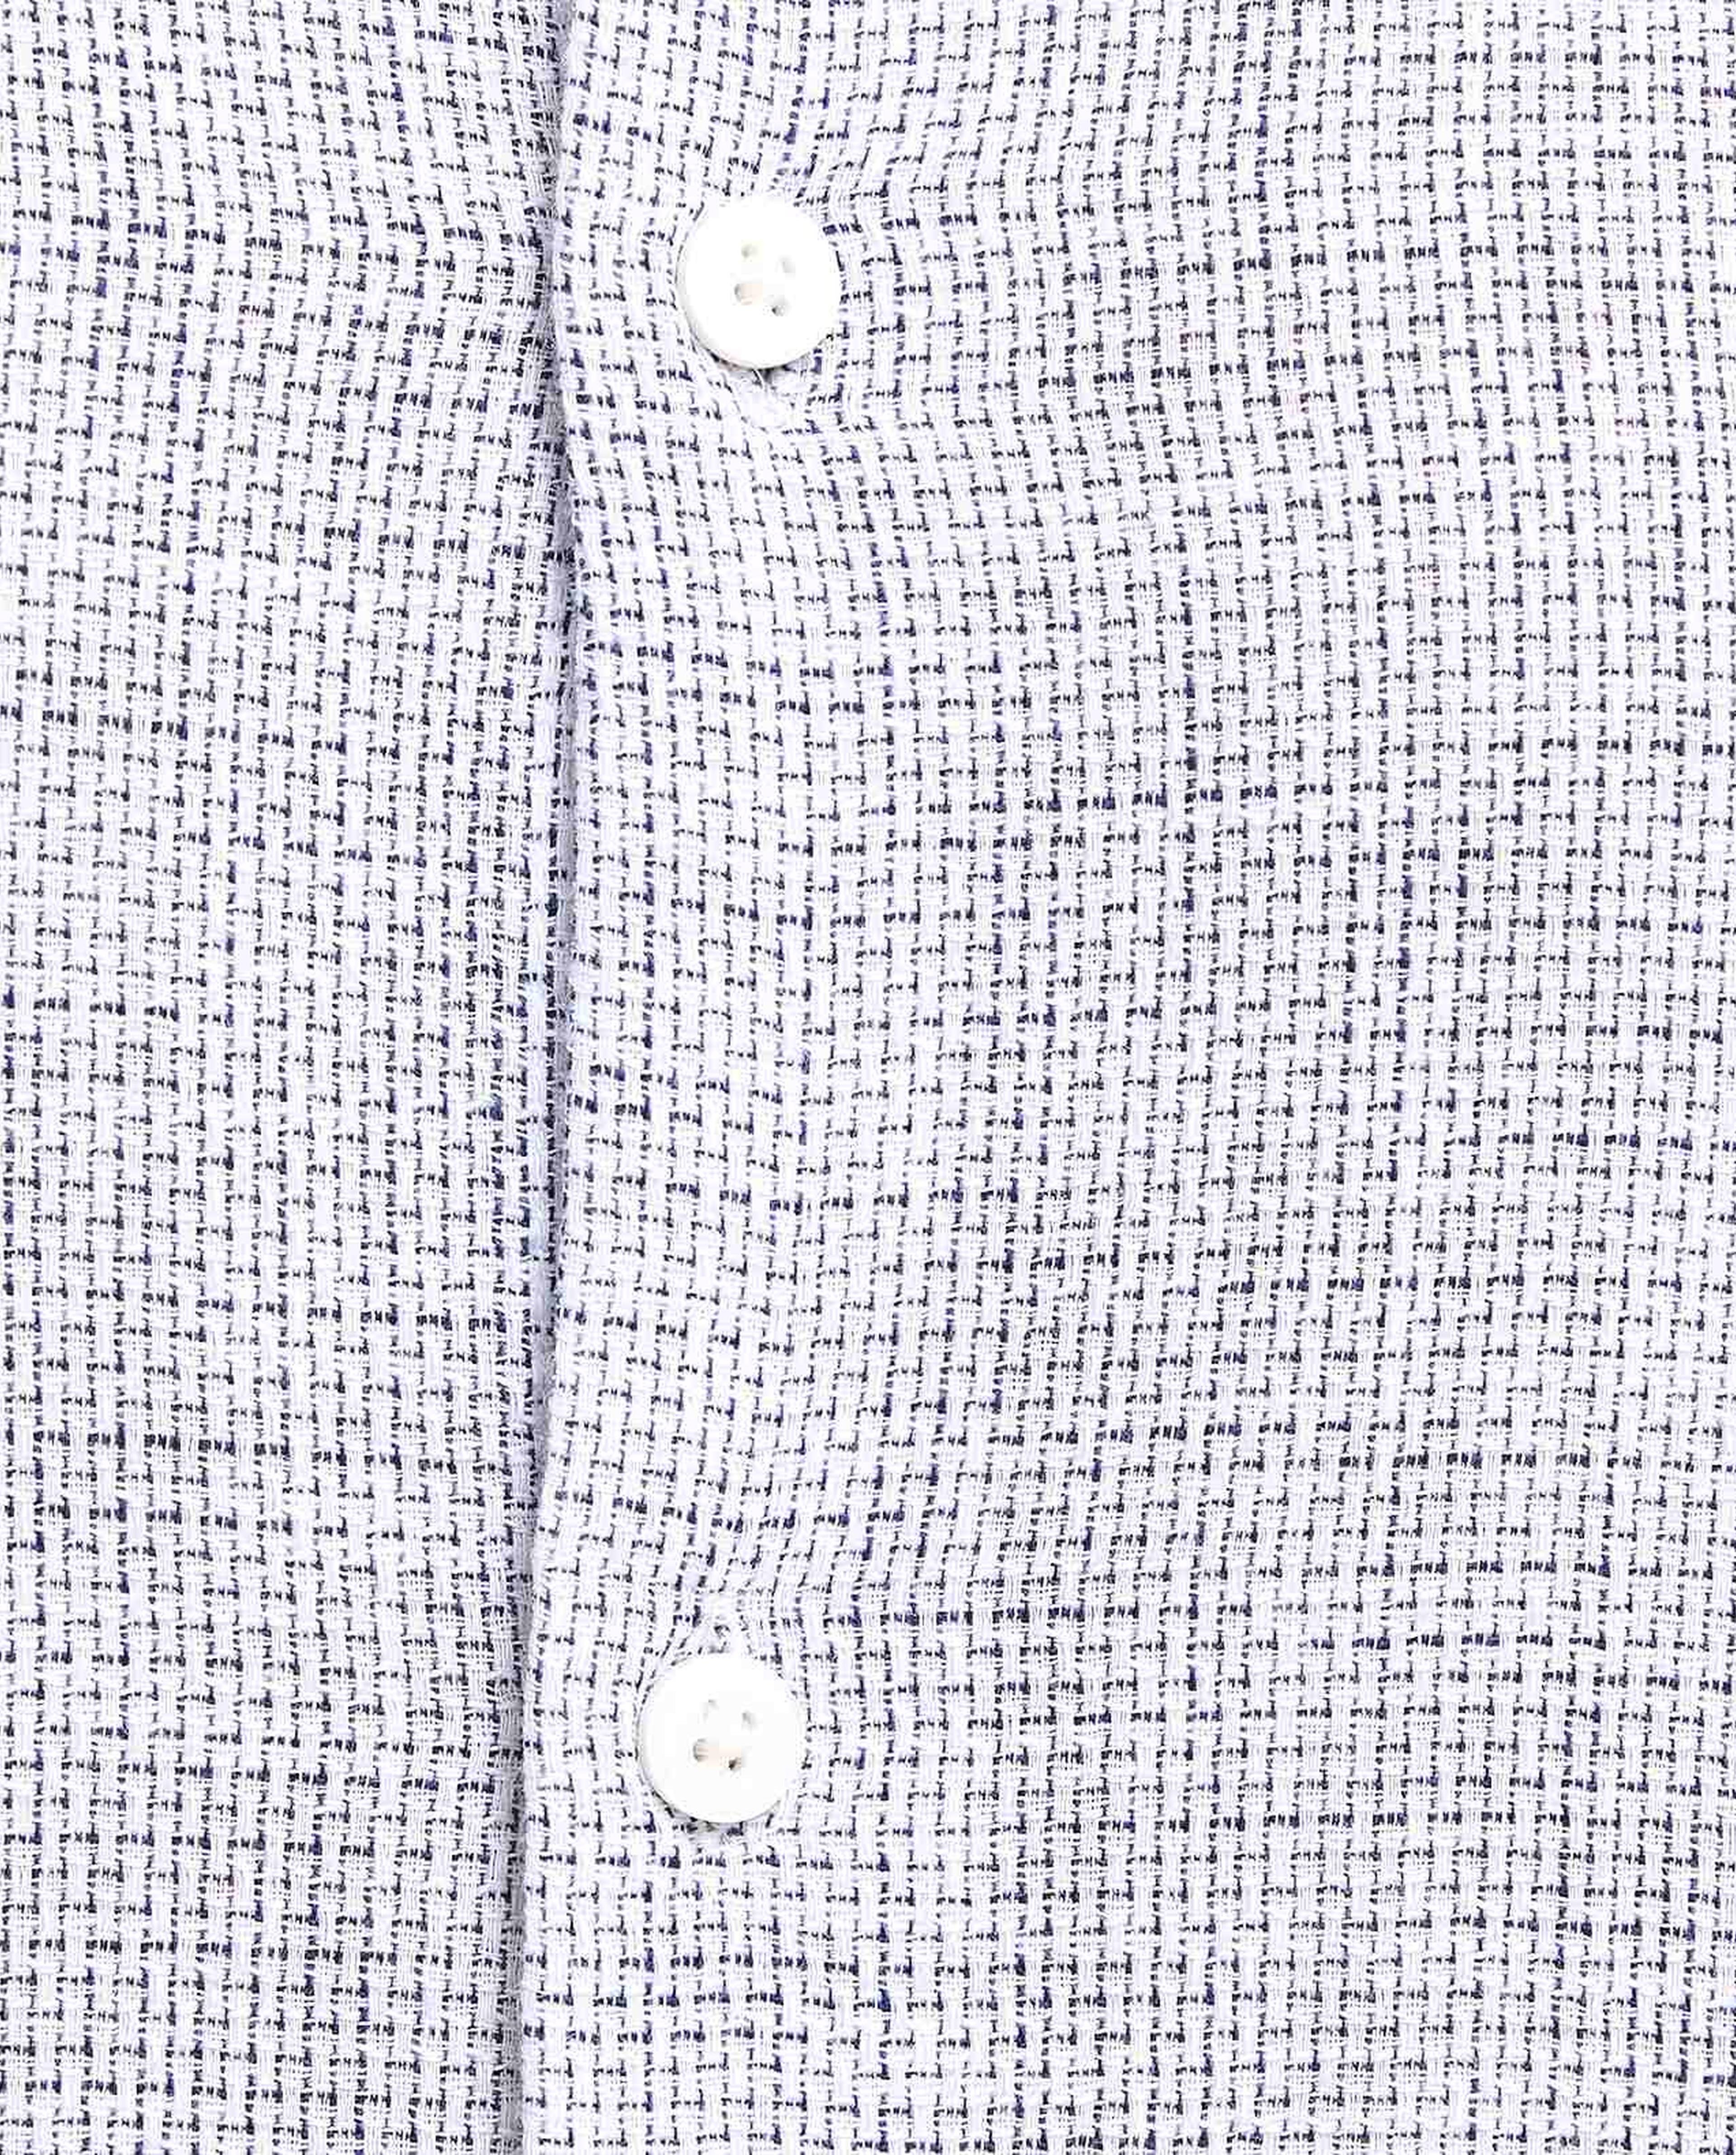 Textured Shirt with Classic Collar and Short Sleeves